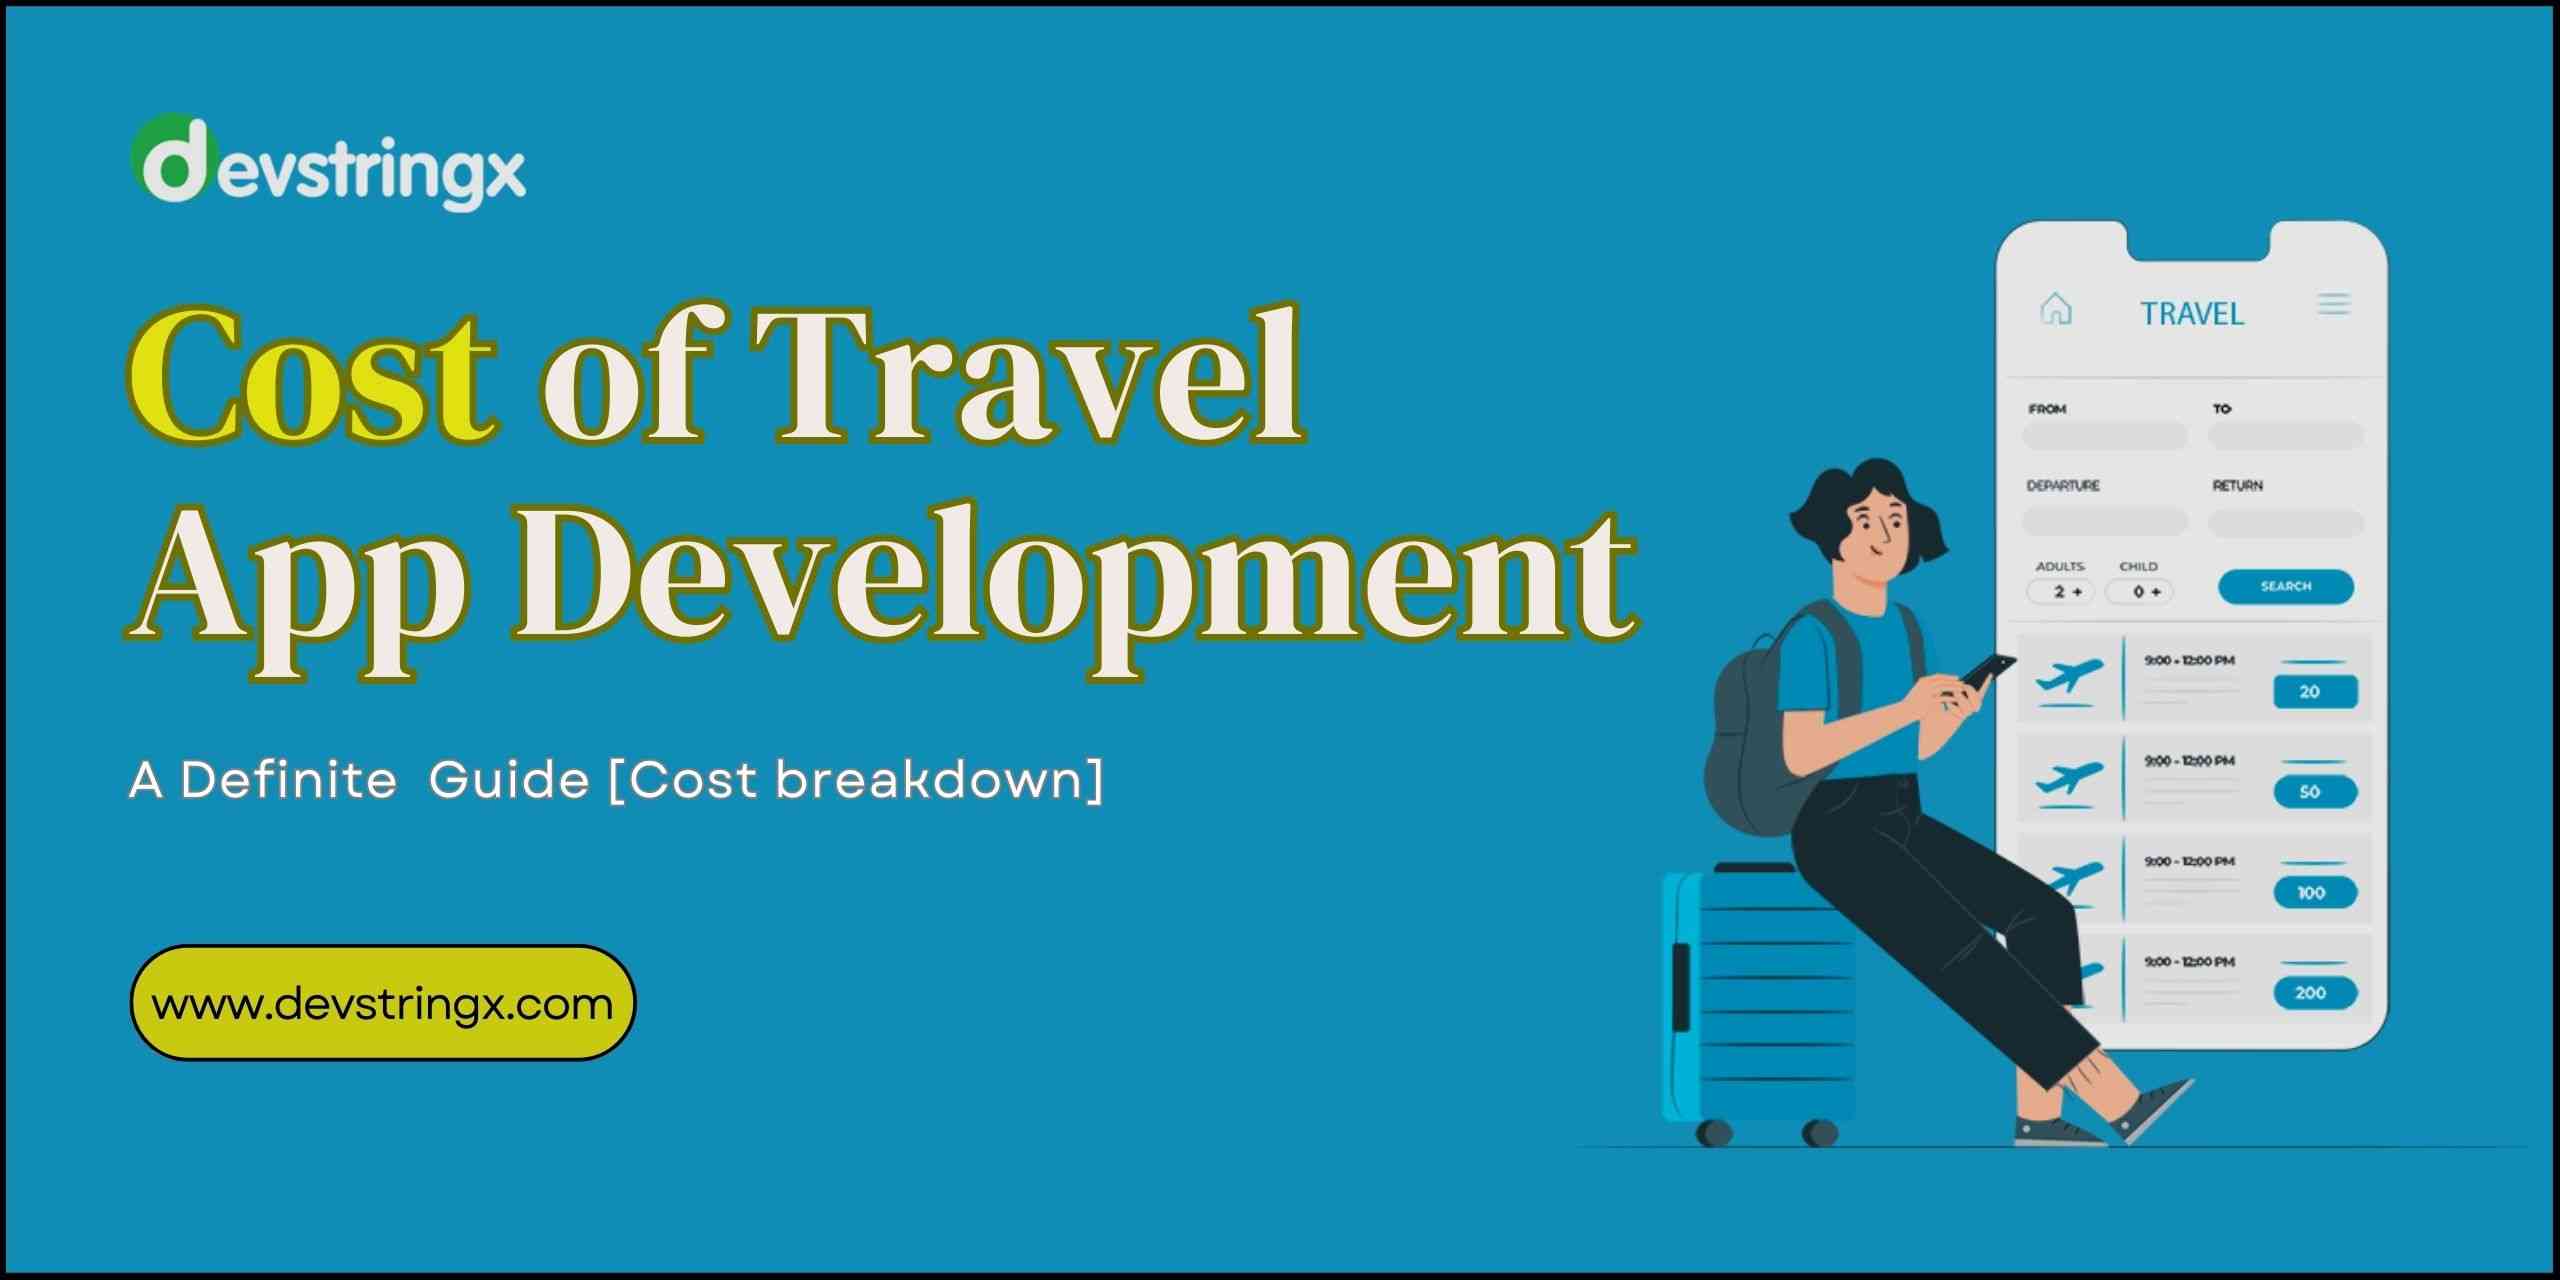 Feature image for travel app development cost blog